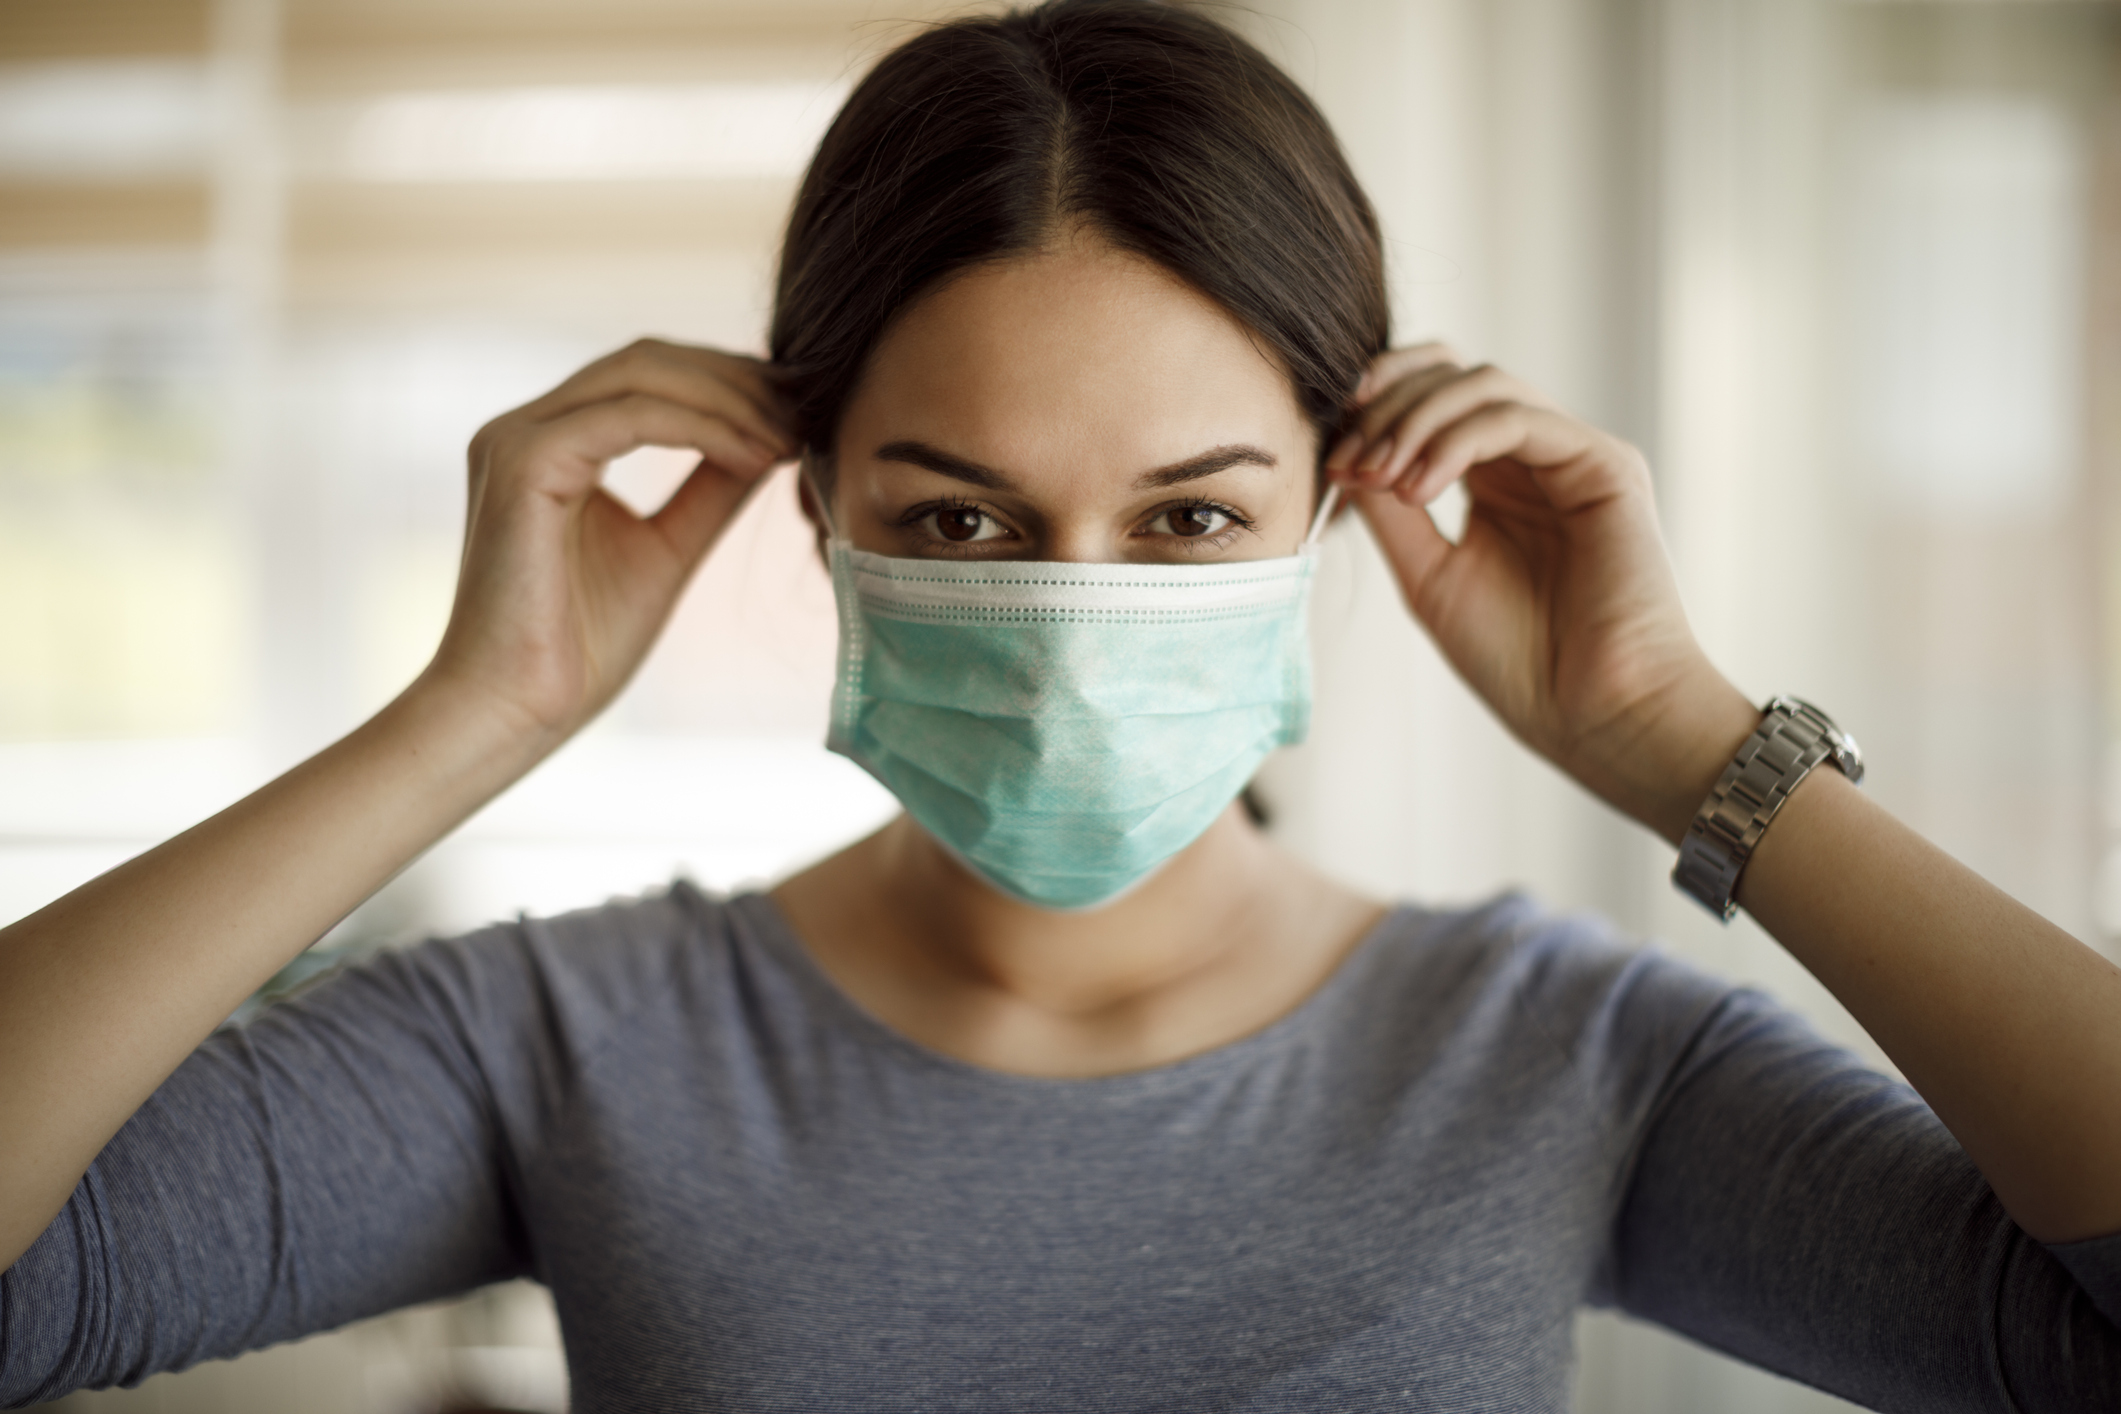 woman putting on a protective face mask to prevent the spread of coronavirus